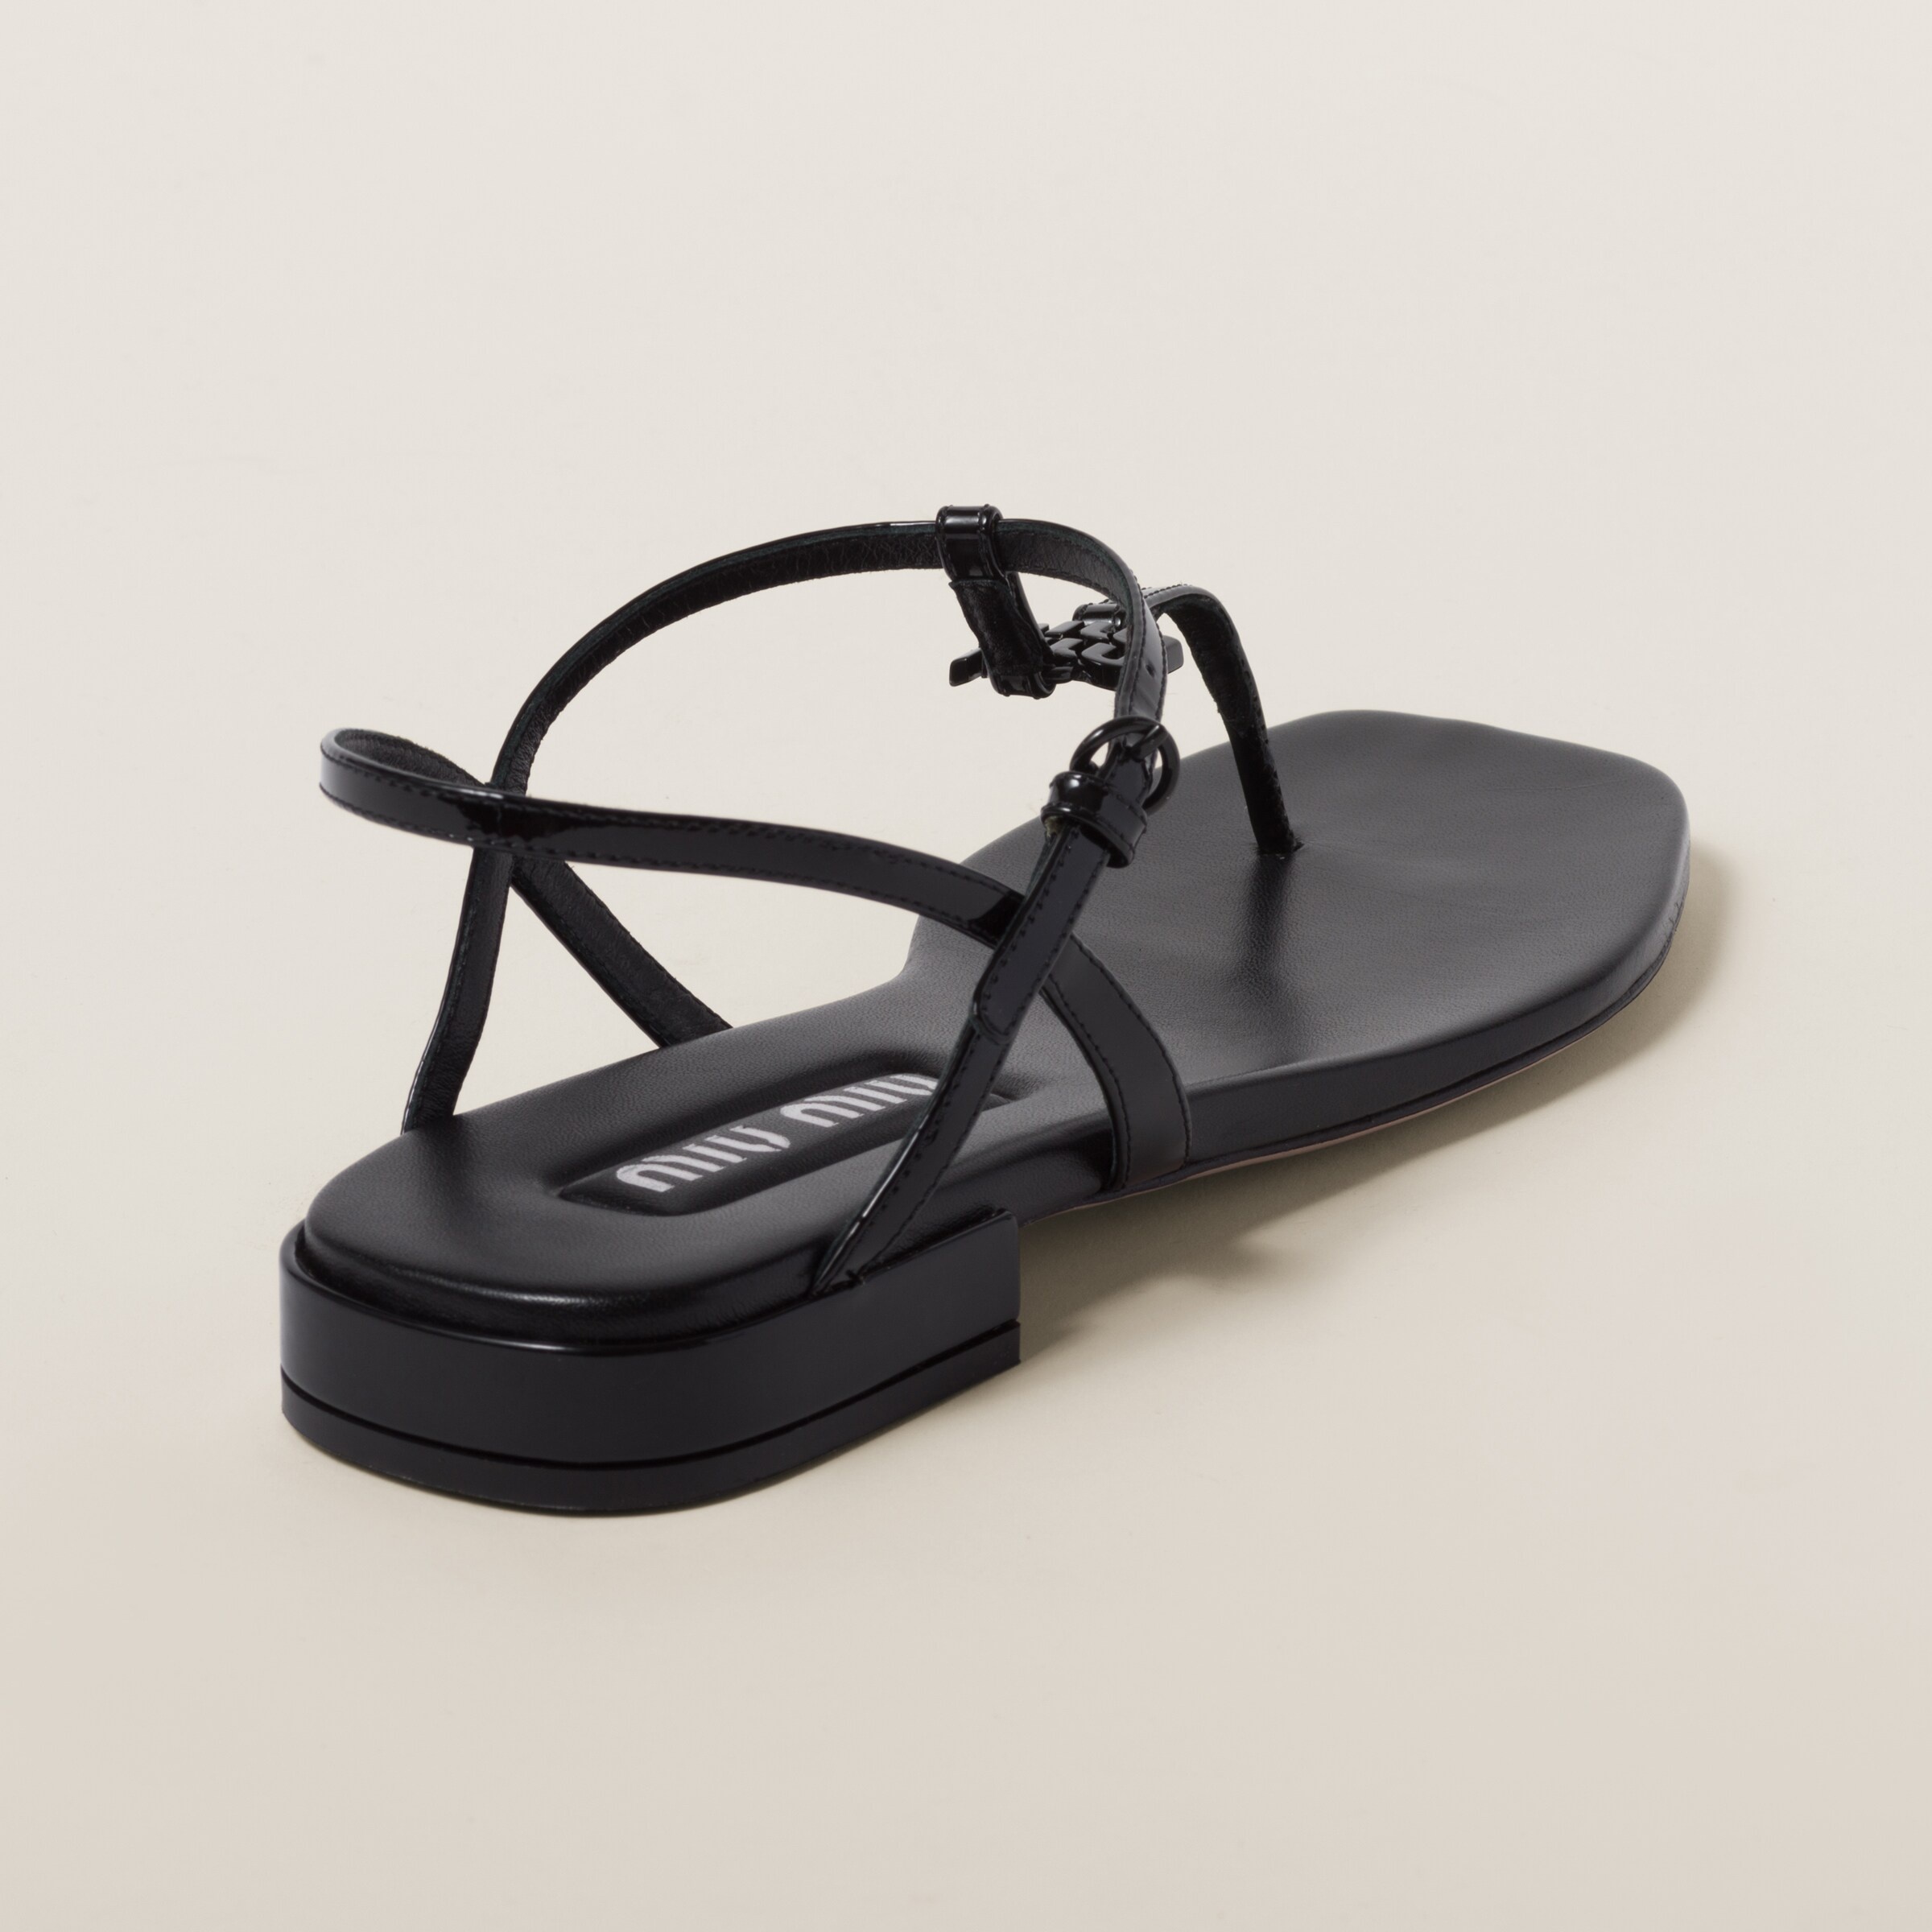 Patent thong sandals - 2